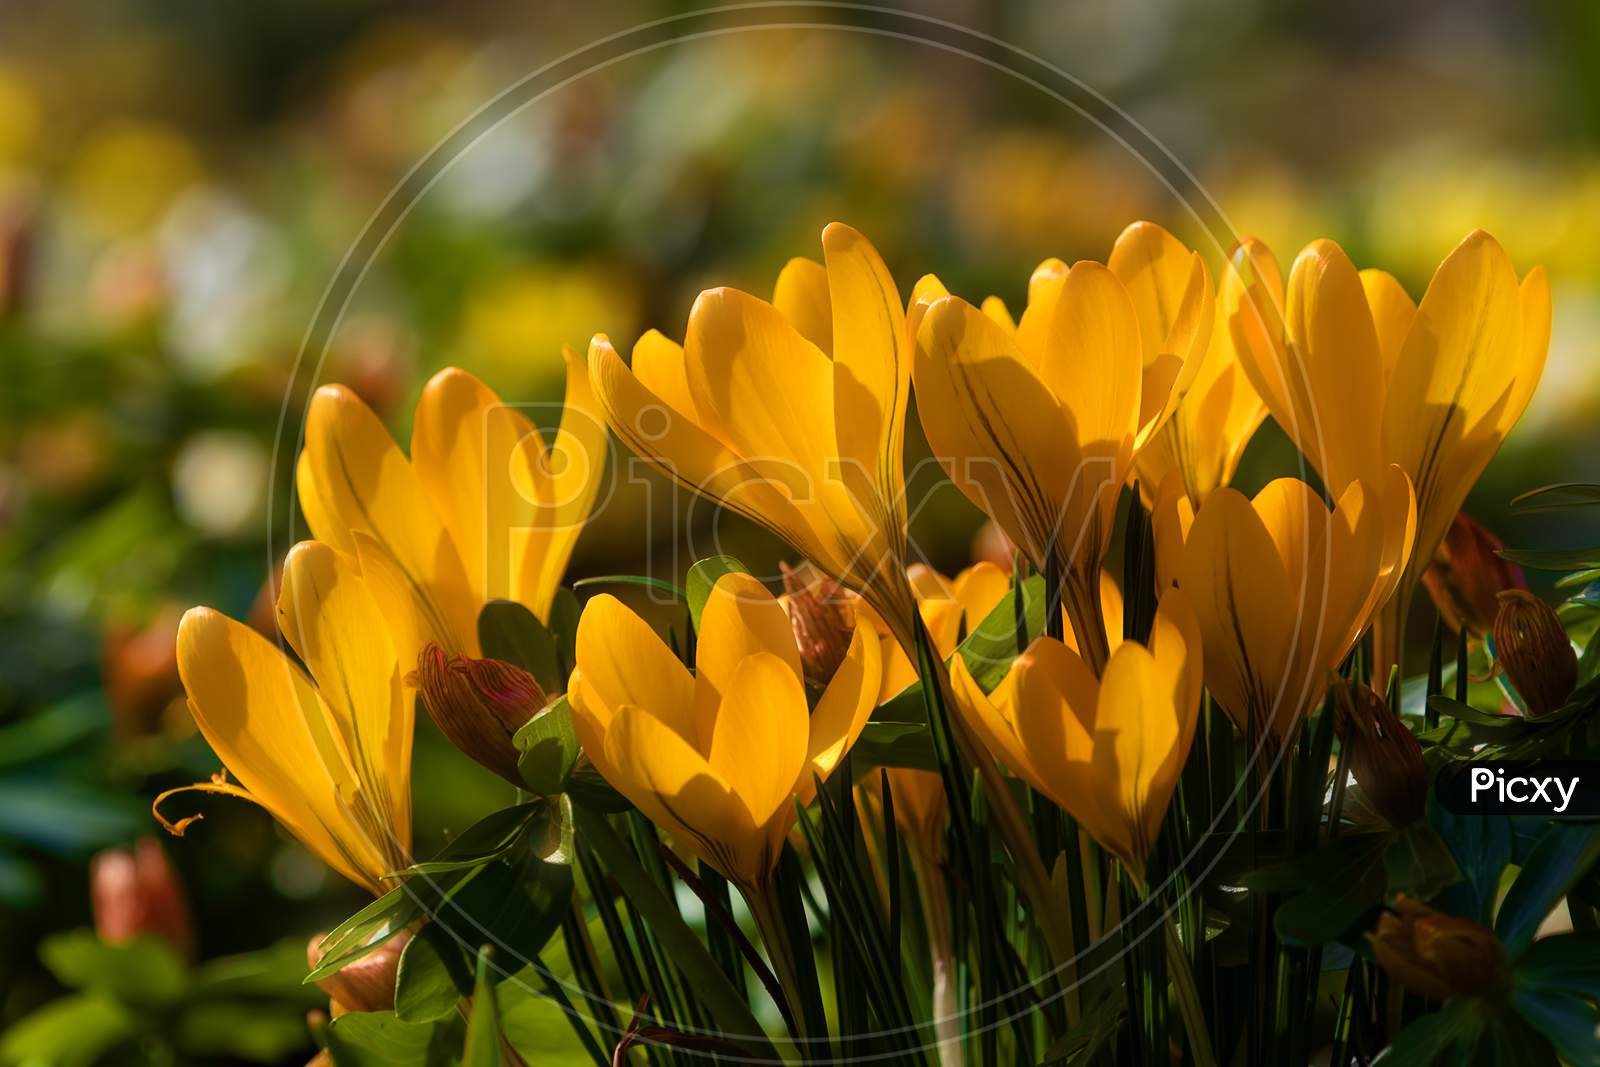 Beautiful spring background with close-up of a group of blooming purple, yellow crocus flowers in spring garden.